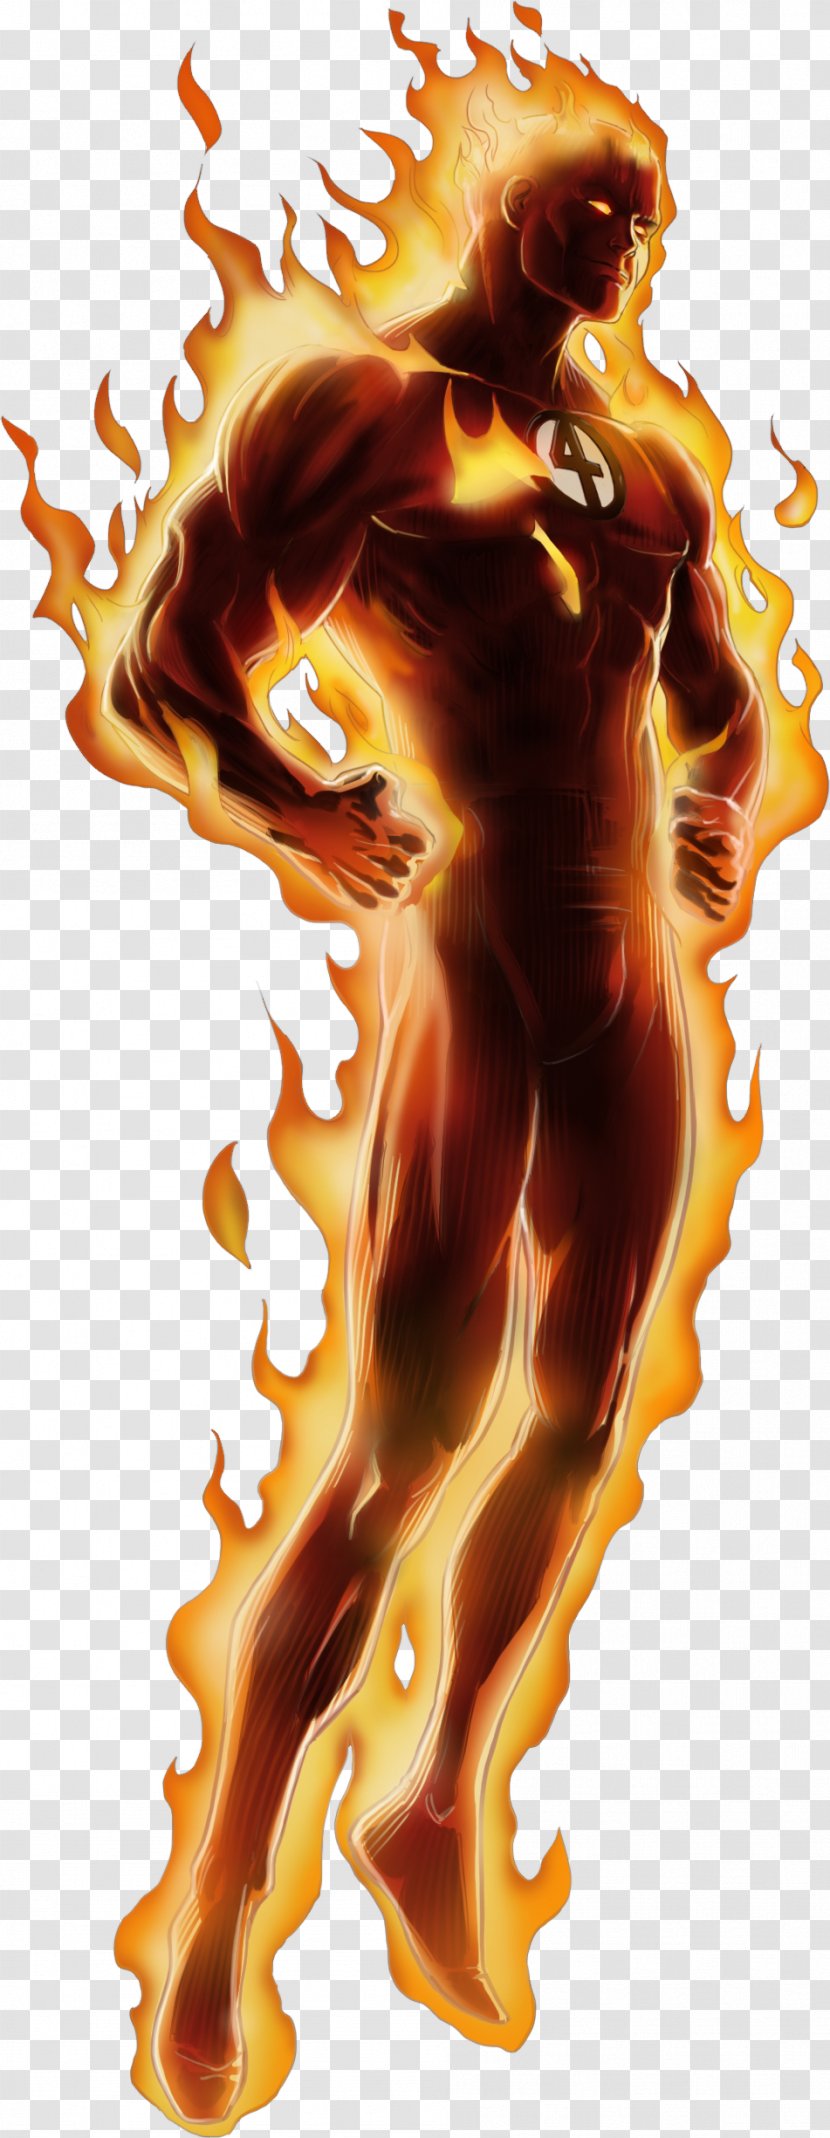 Human Torch Invisible Woman Fantastic Four - Fictional Character - Picture Transparent PNG